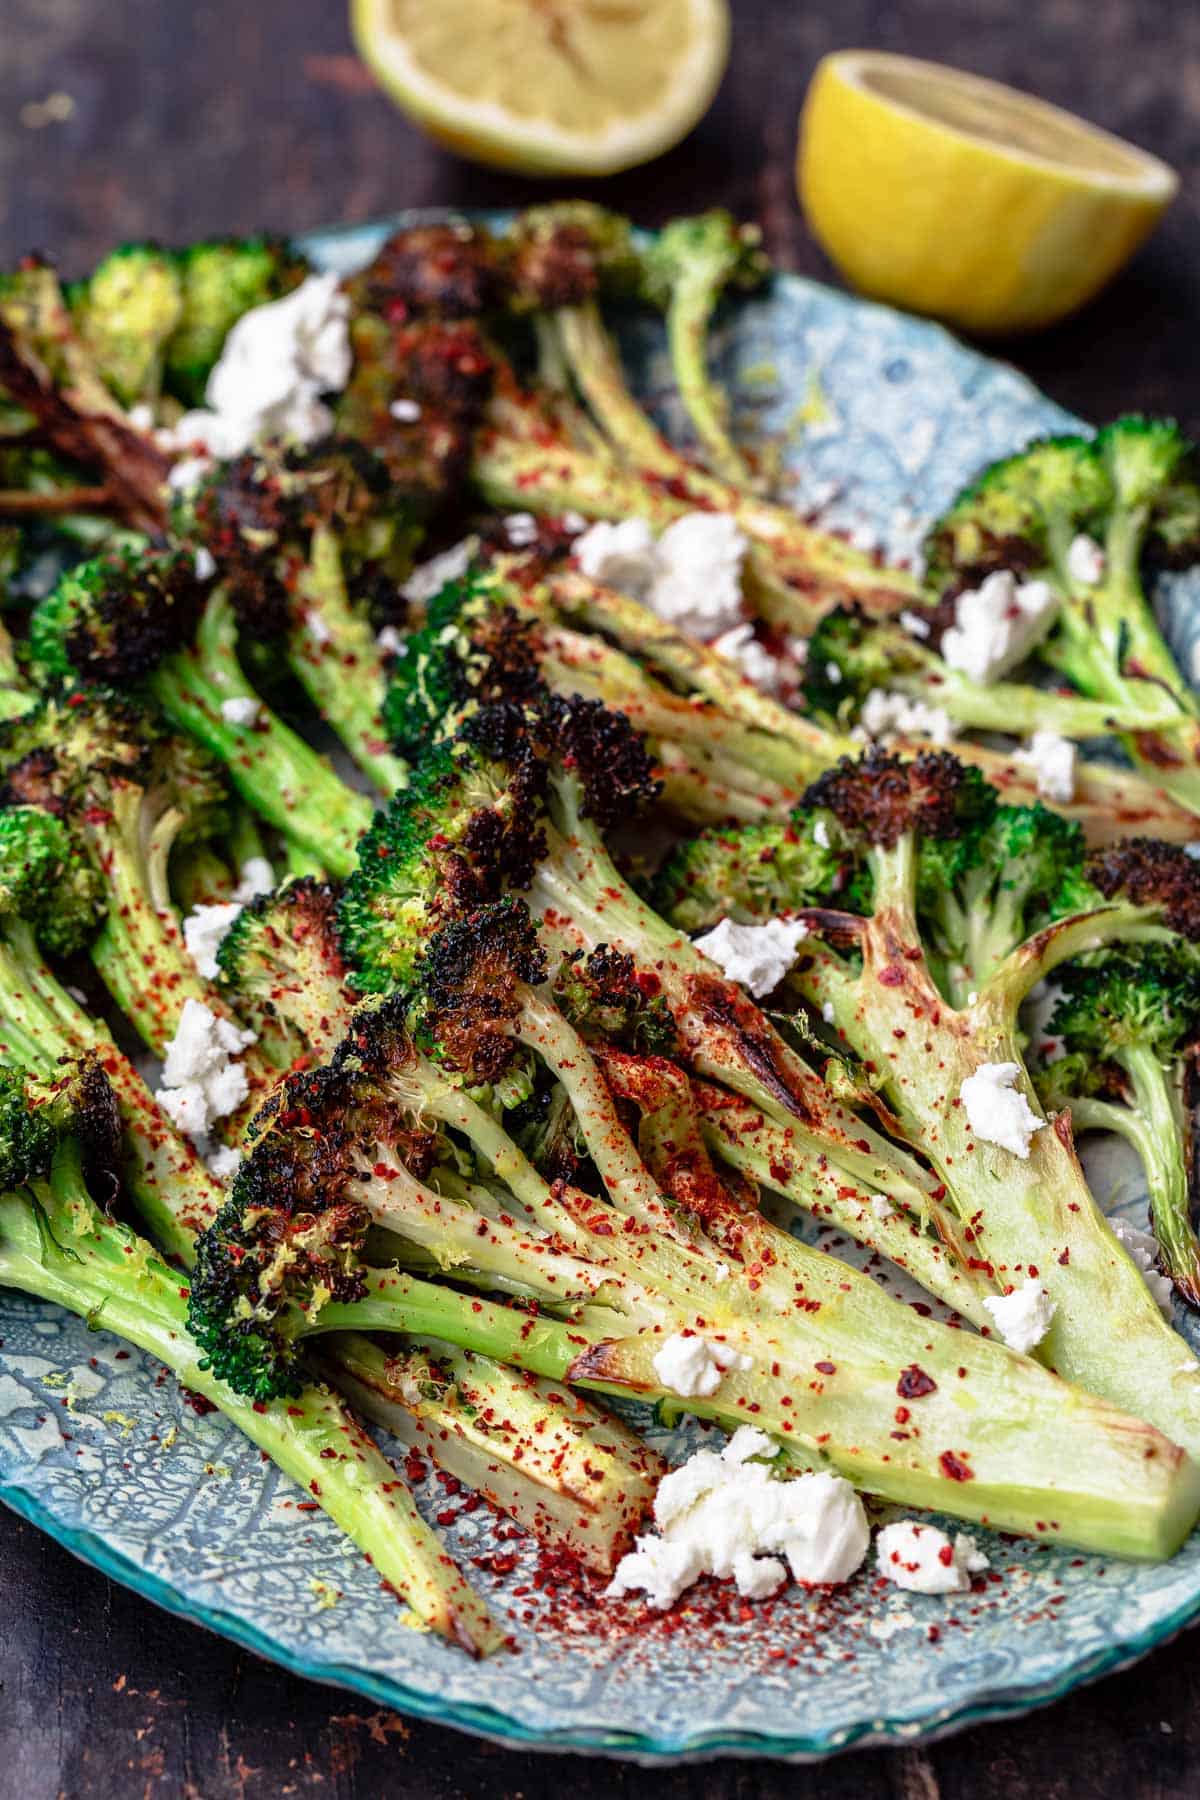 roasted broccoli with lemon wedges on the side